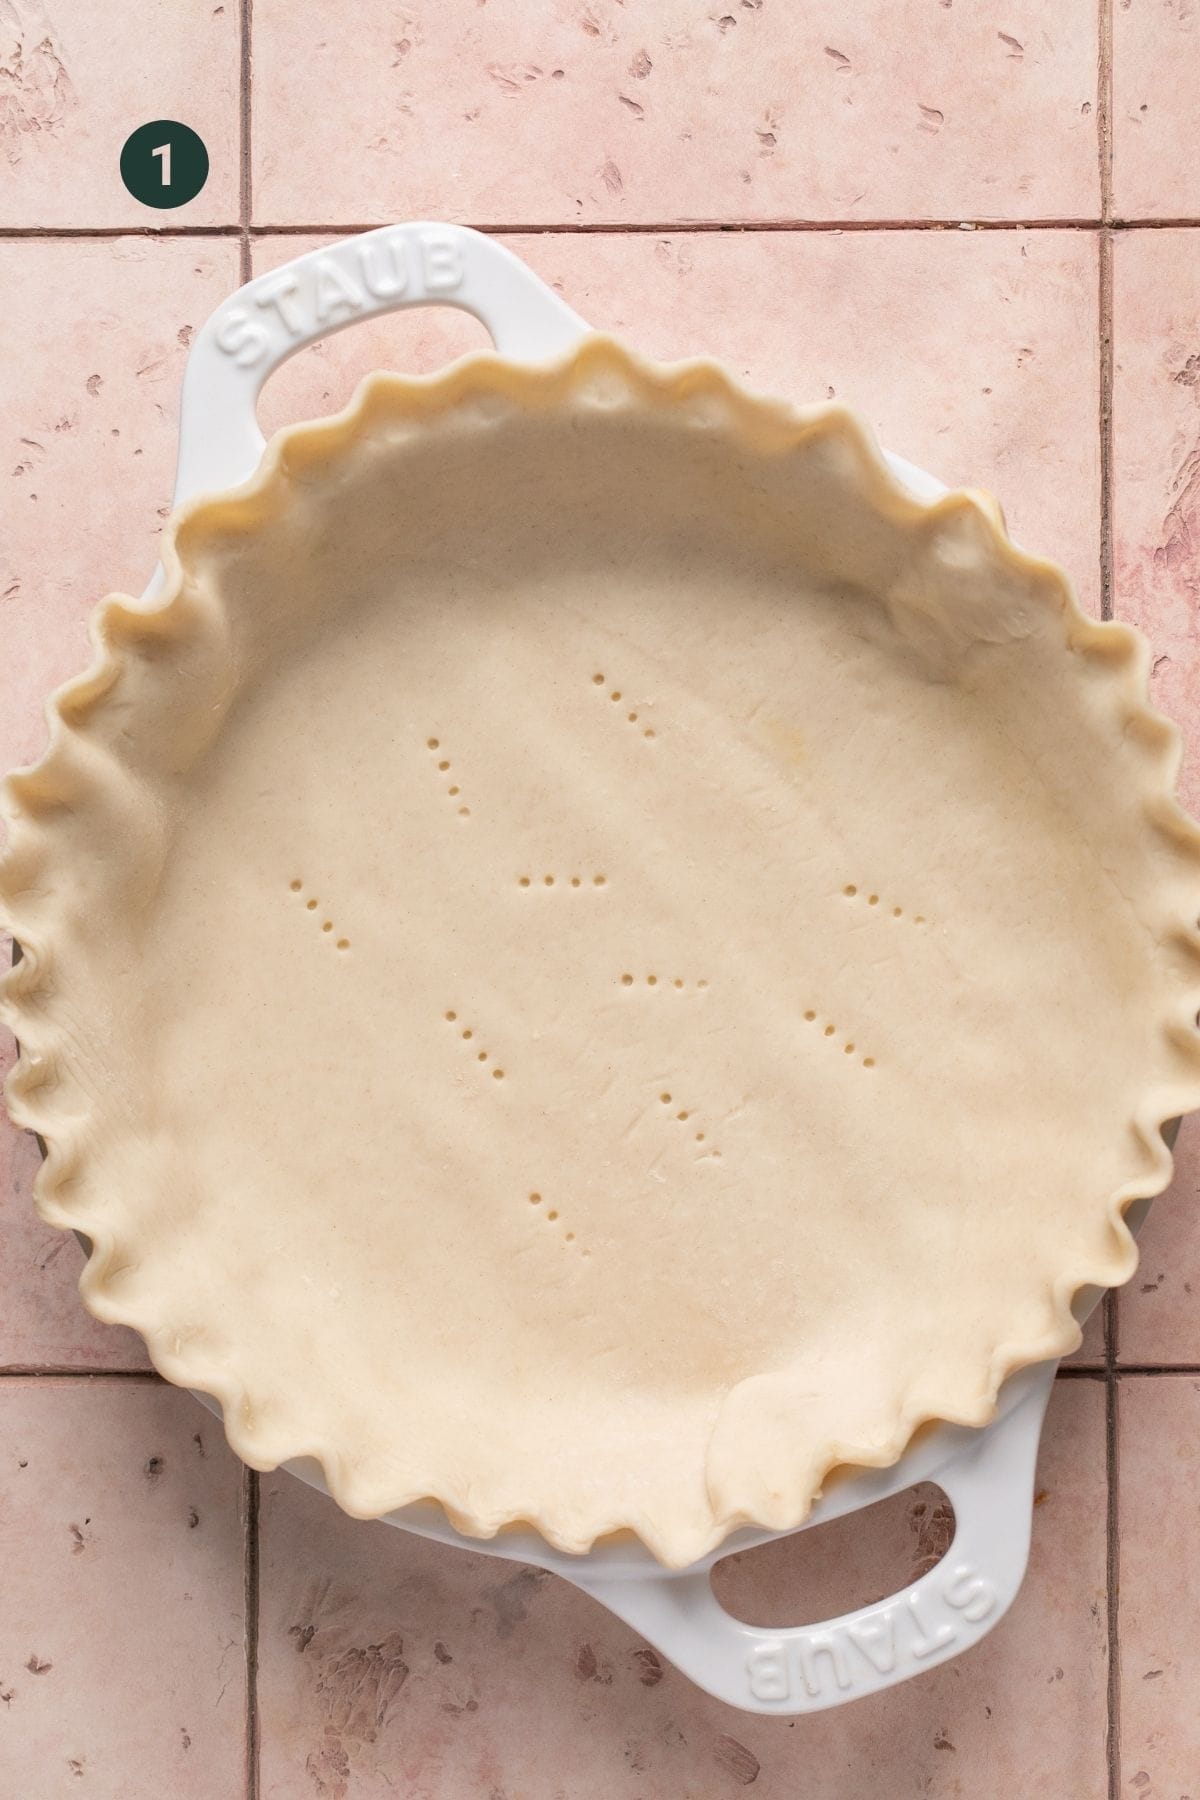 Pie crust with holes poked in the center in a pie dish. 